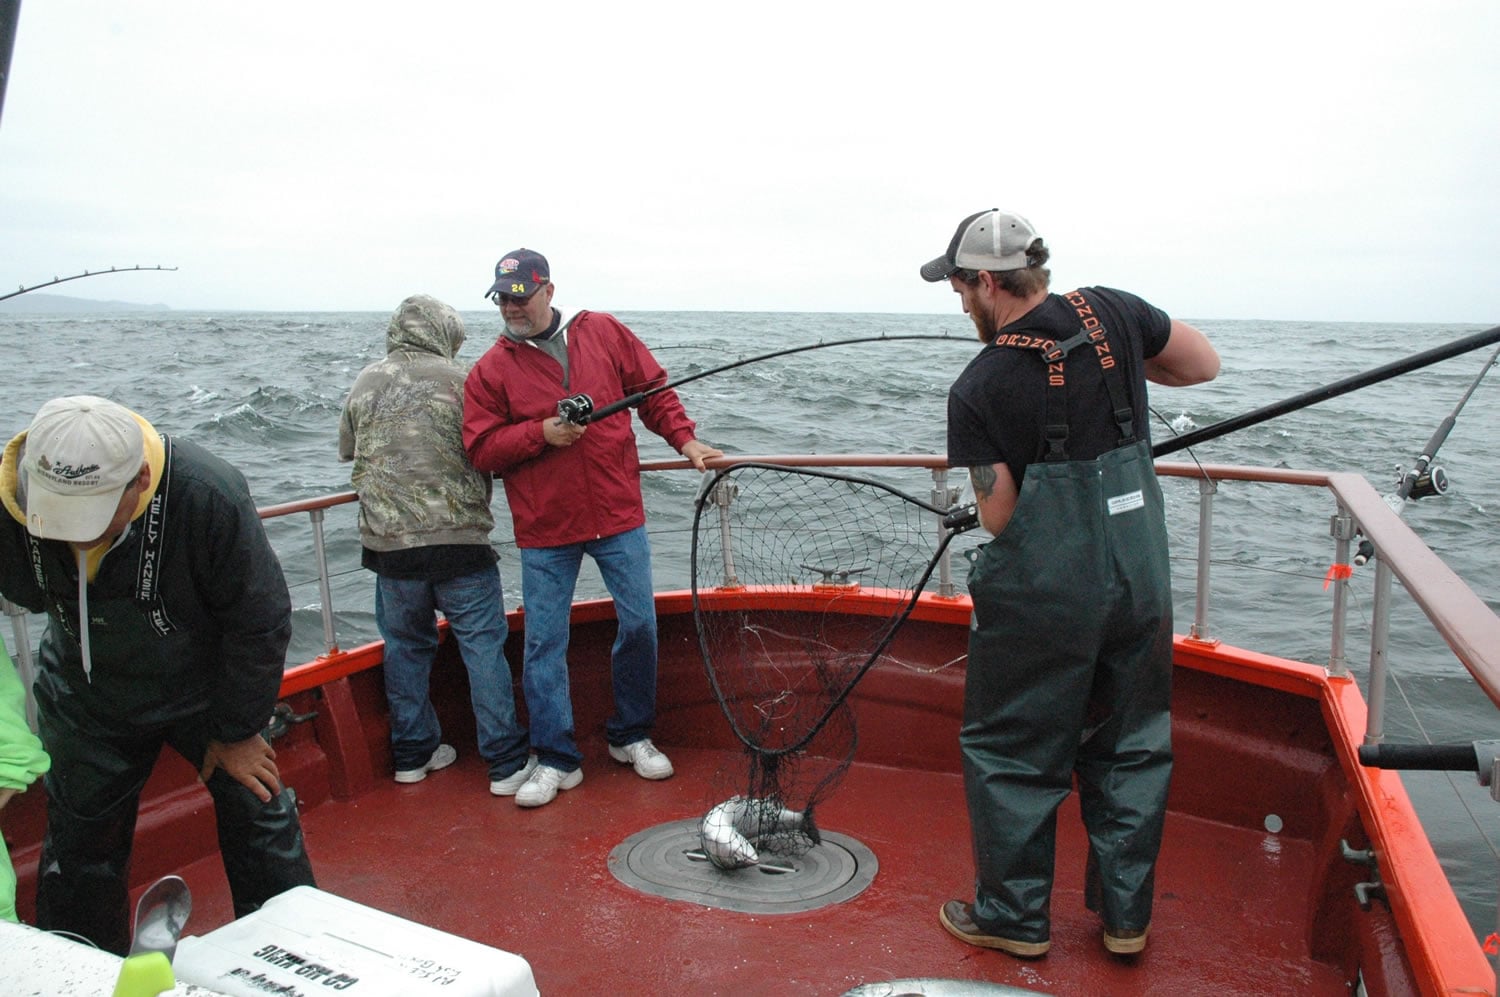 Deckhand Donald Pitts nets a salmon for a charter boat customer in 2014 in the Pacific Ocean off Ilwaco.